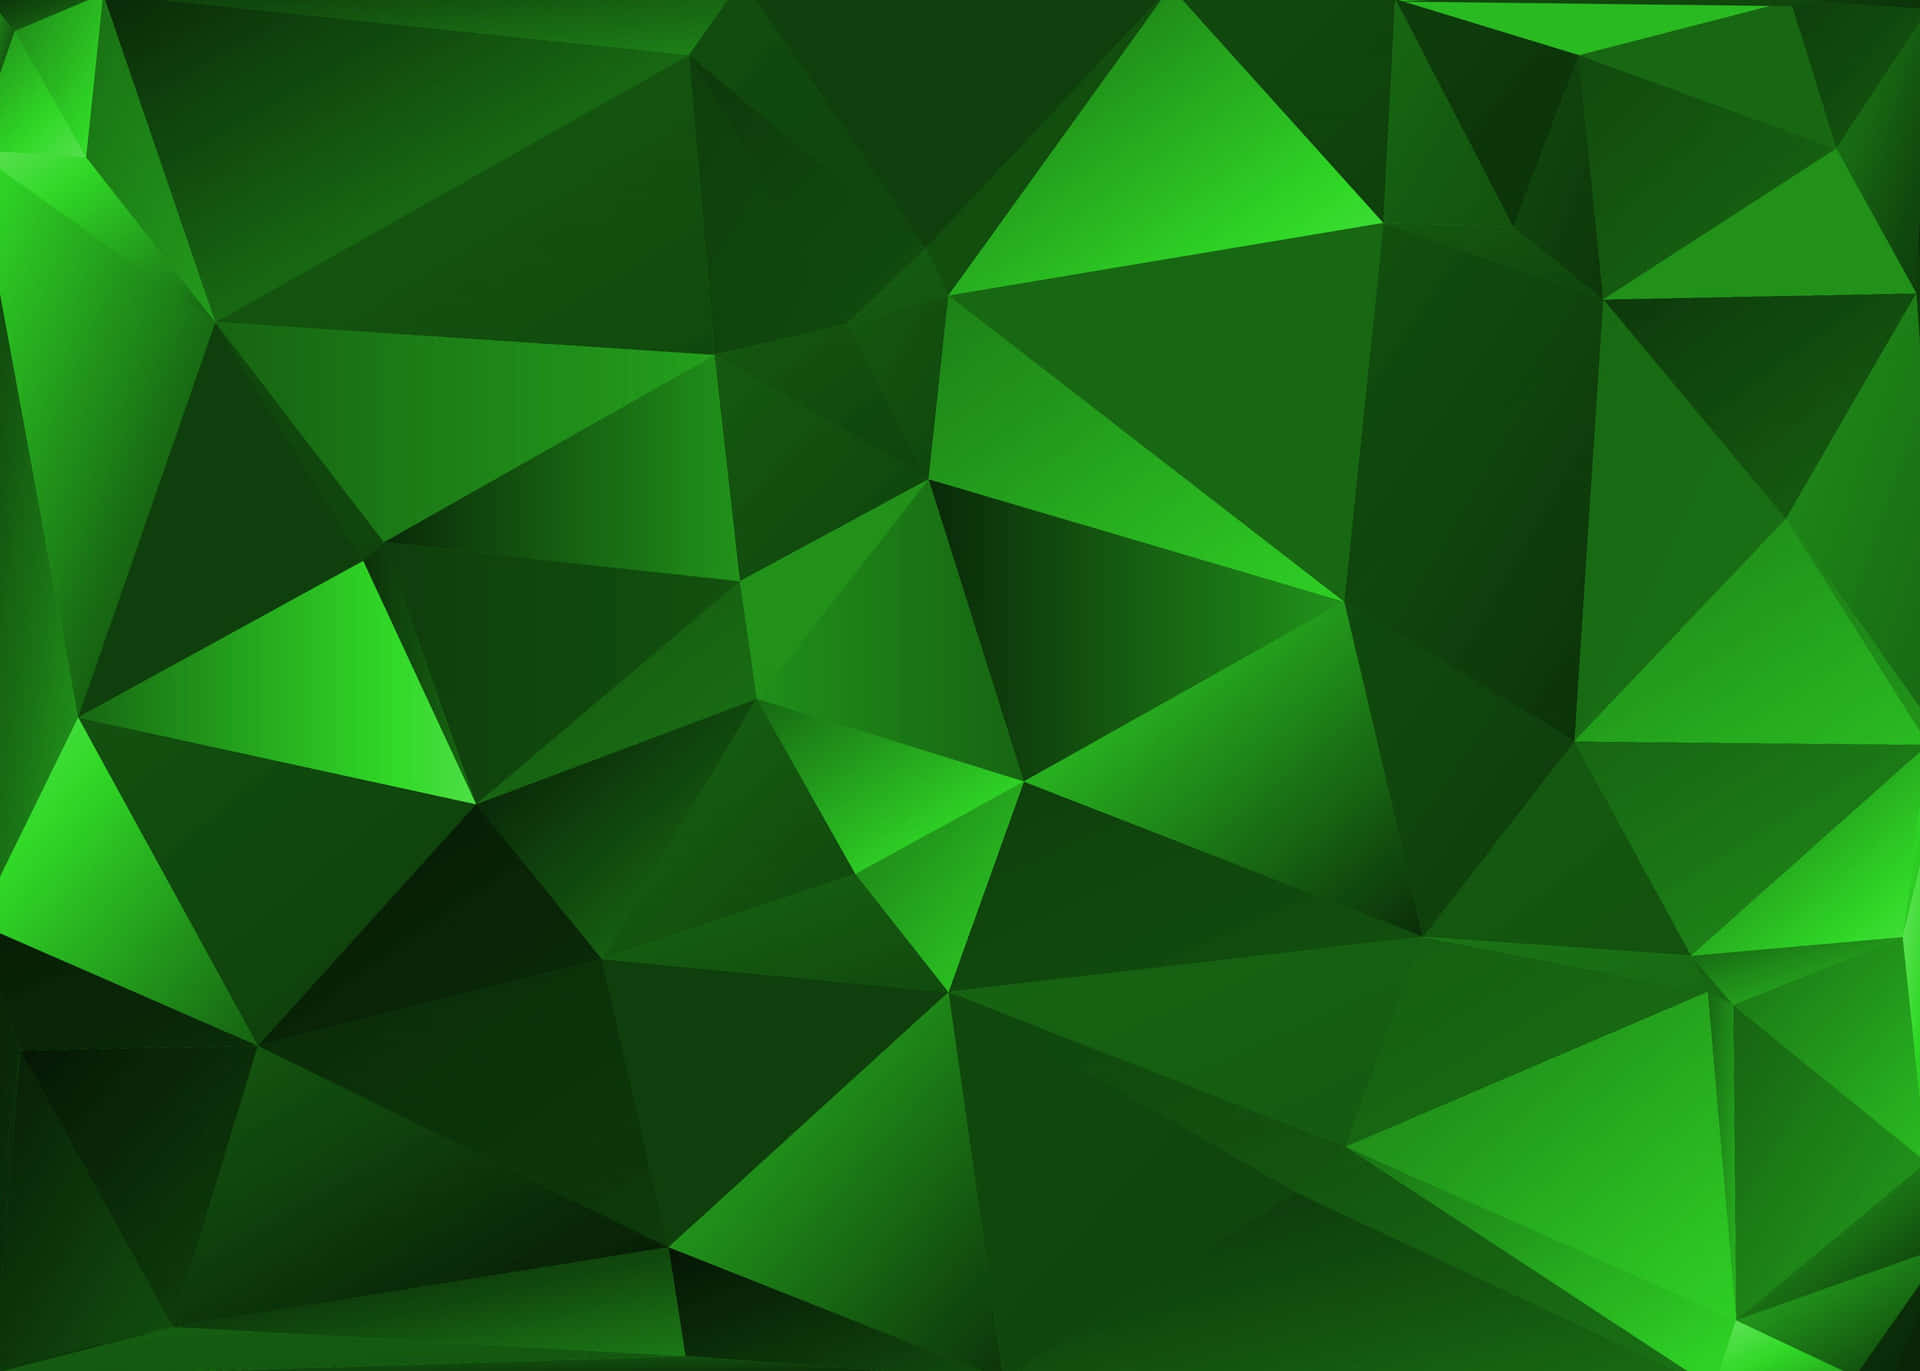 Green Polygonal Background With Triangles